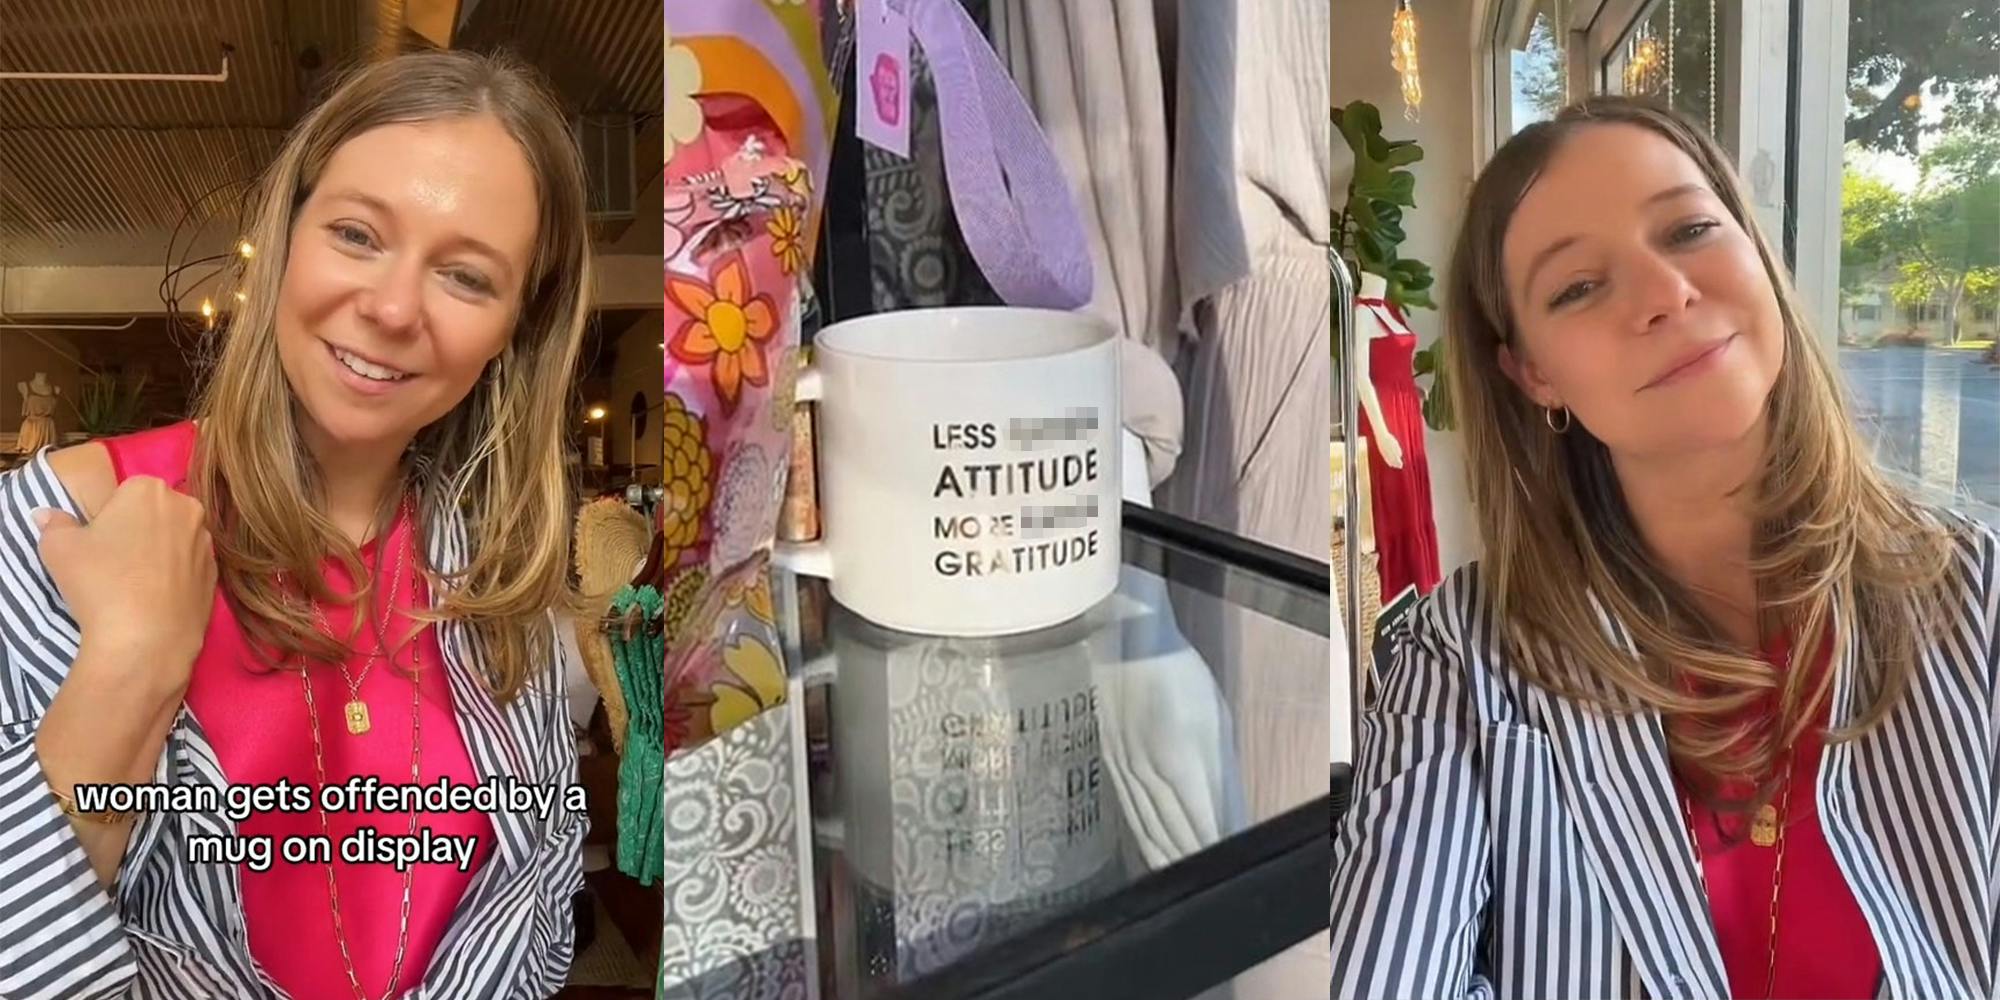 Boutique owner says customer was offended by their display mug, demanded they switch it out